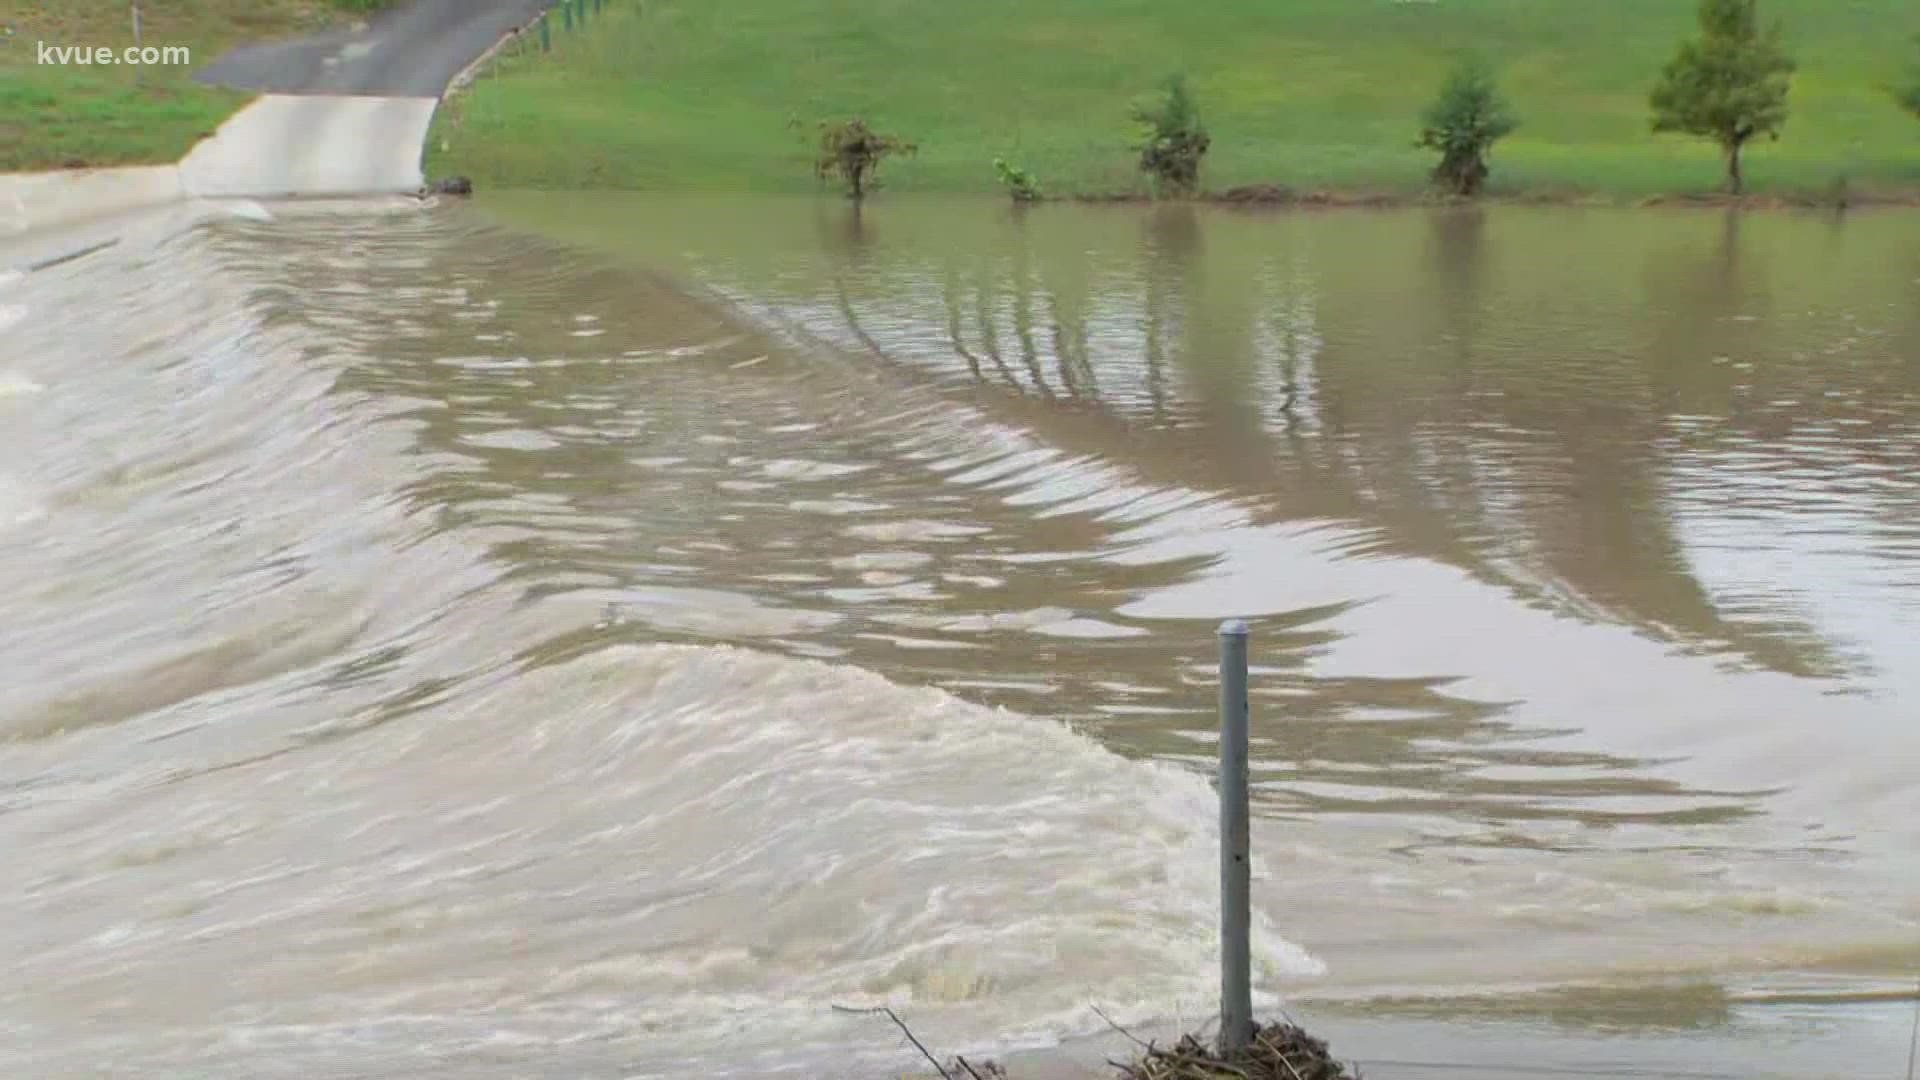 Many were worried this would be a repeat of the deadly 2015 floods in Central Texas.